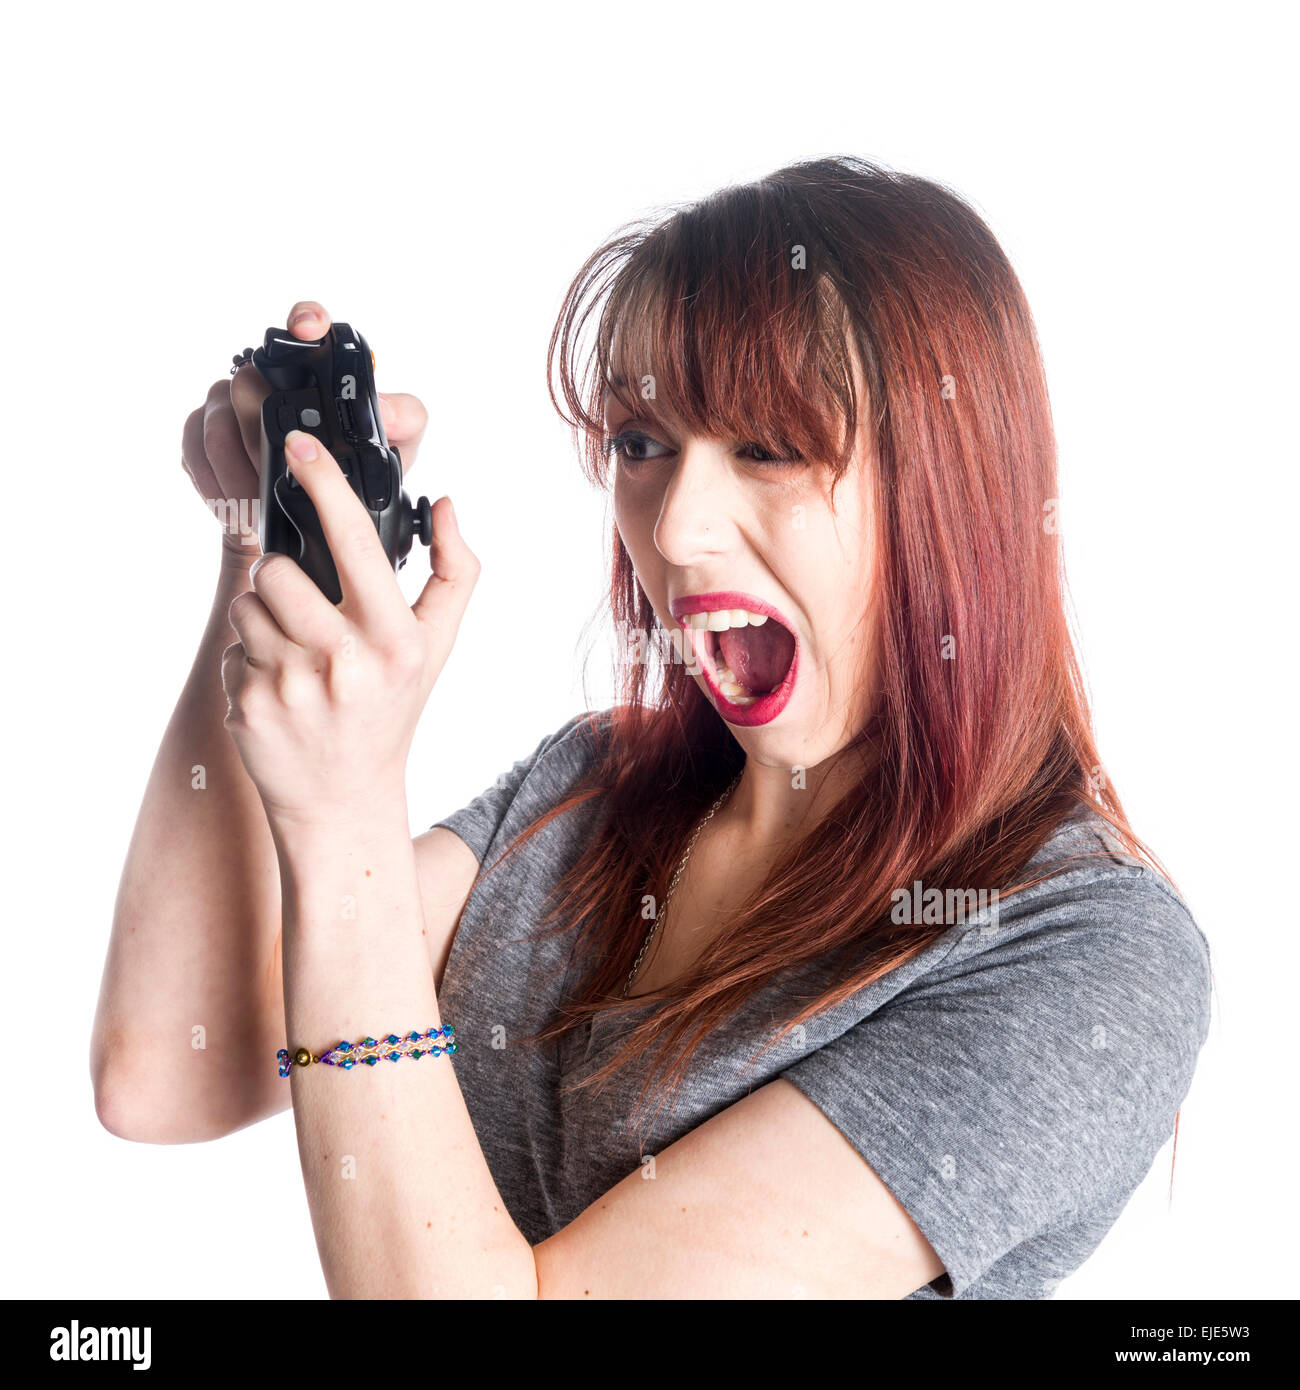 Young Woman Holding Video Game Joysticks Stock Photo